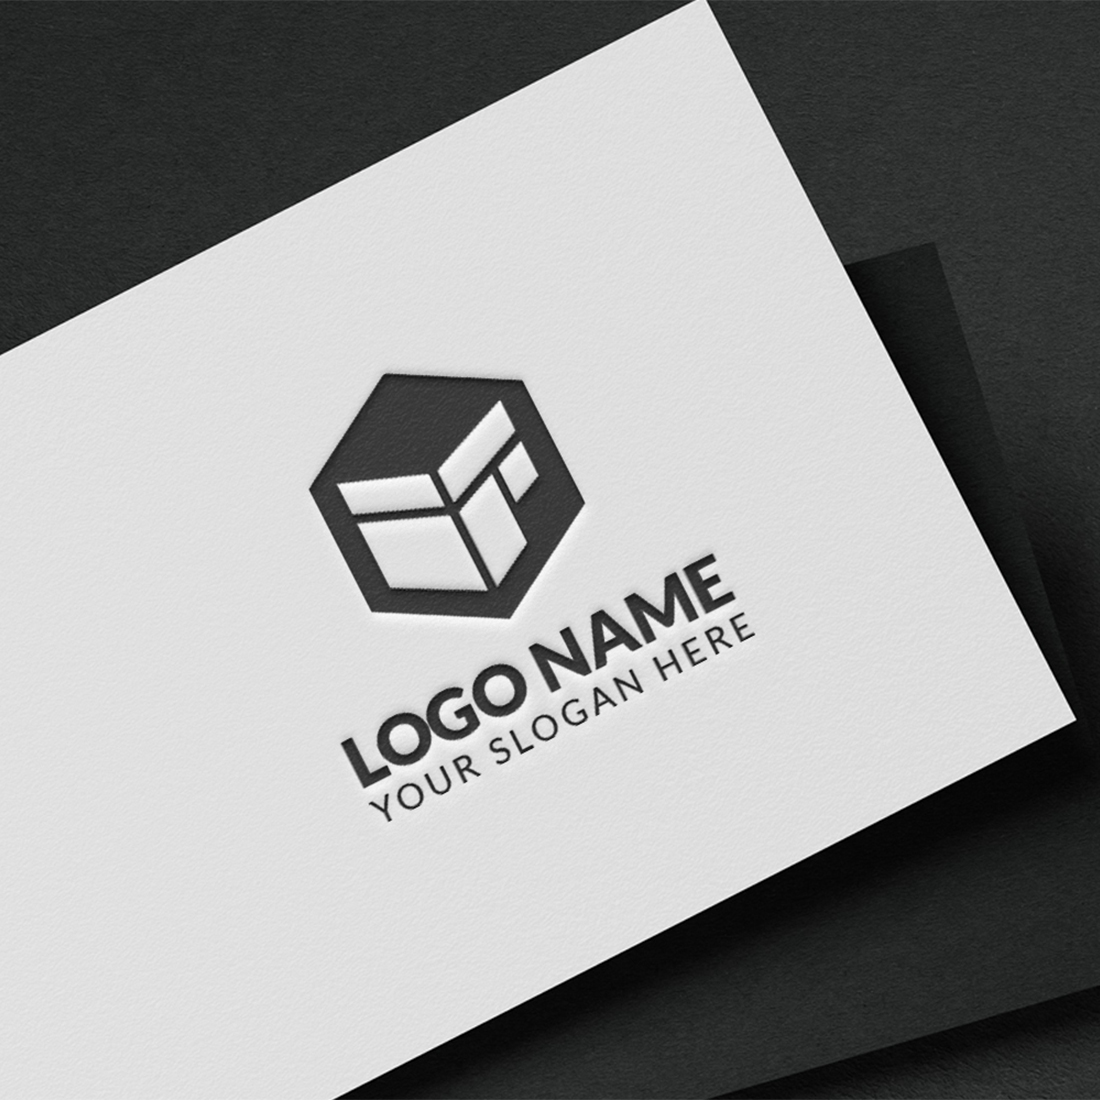 IF Technology Logo Design Template main cover.